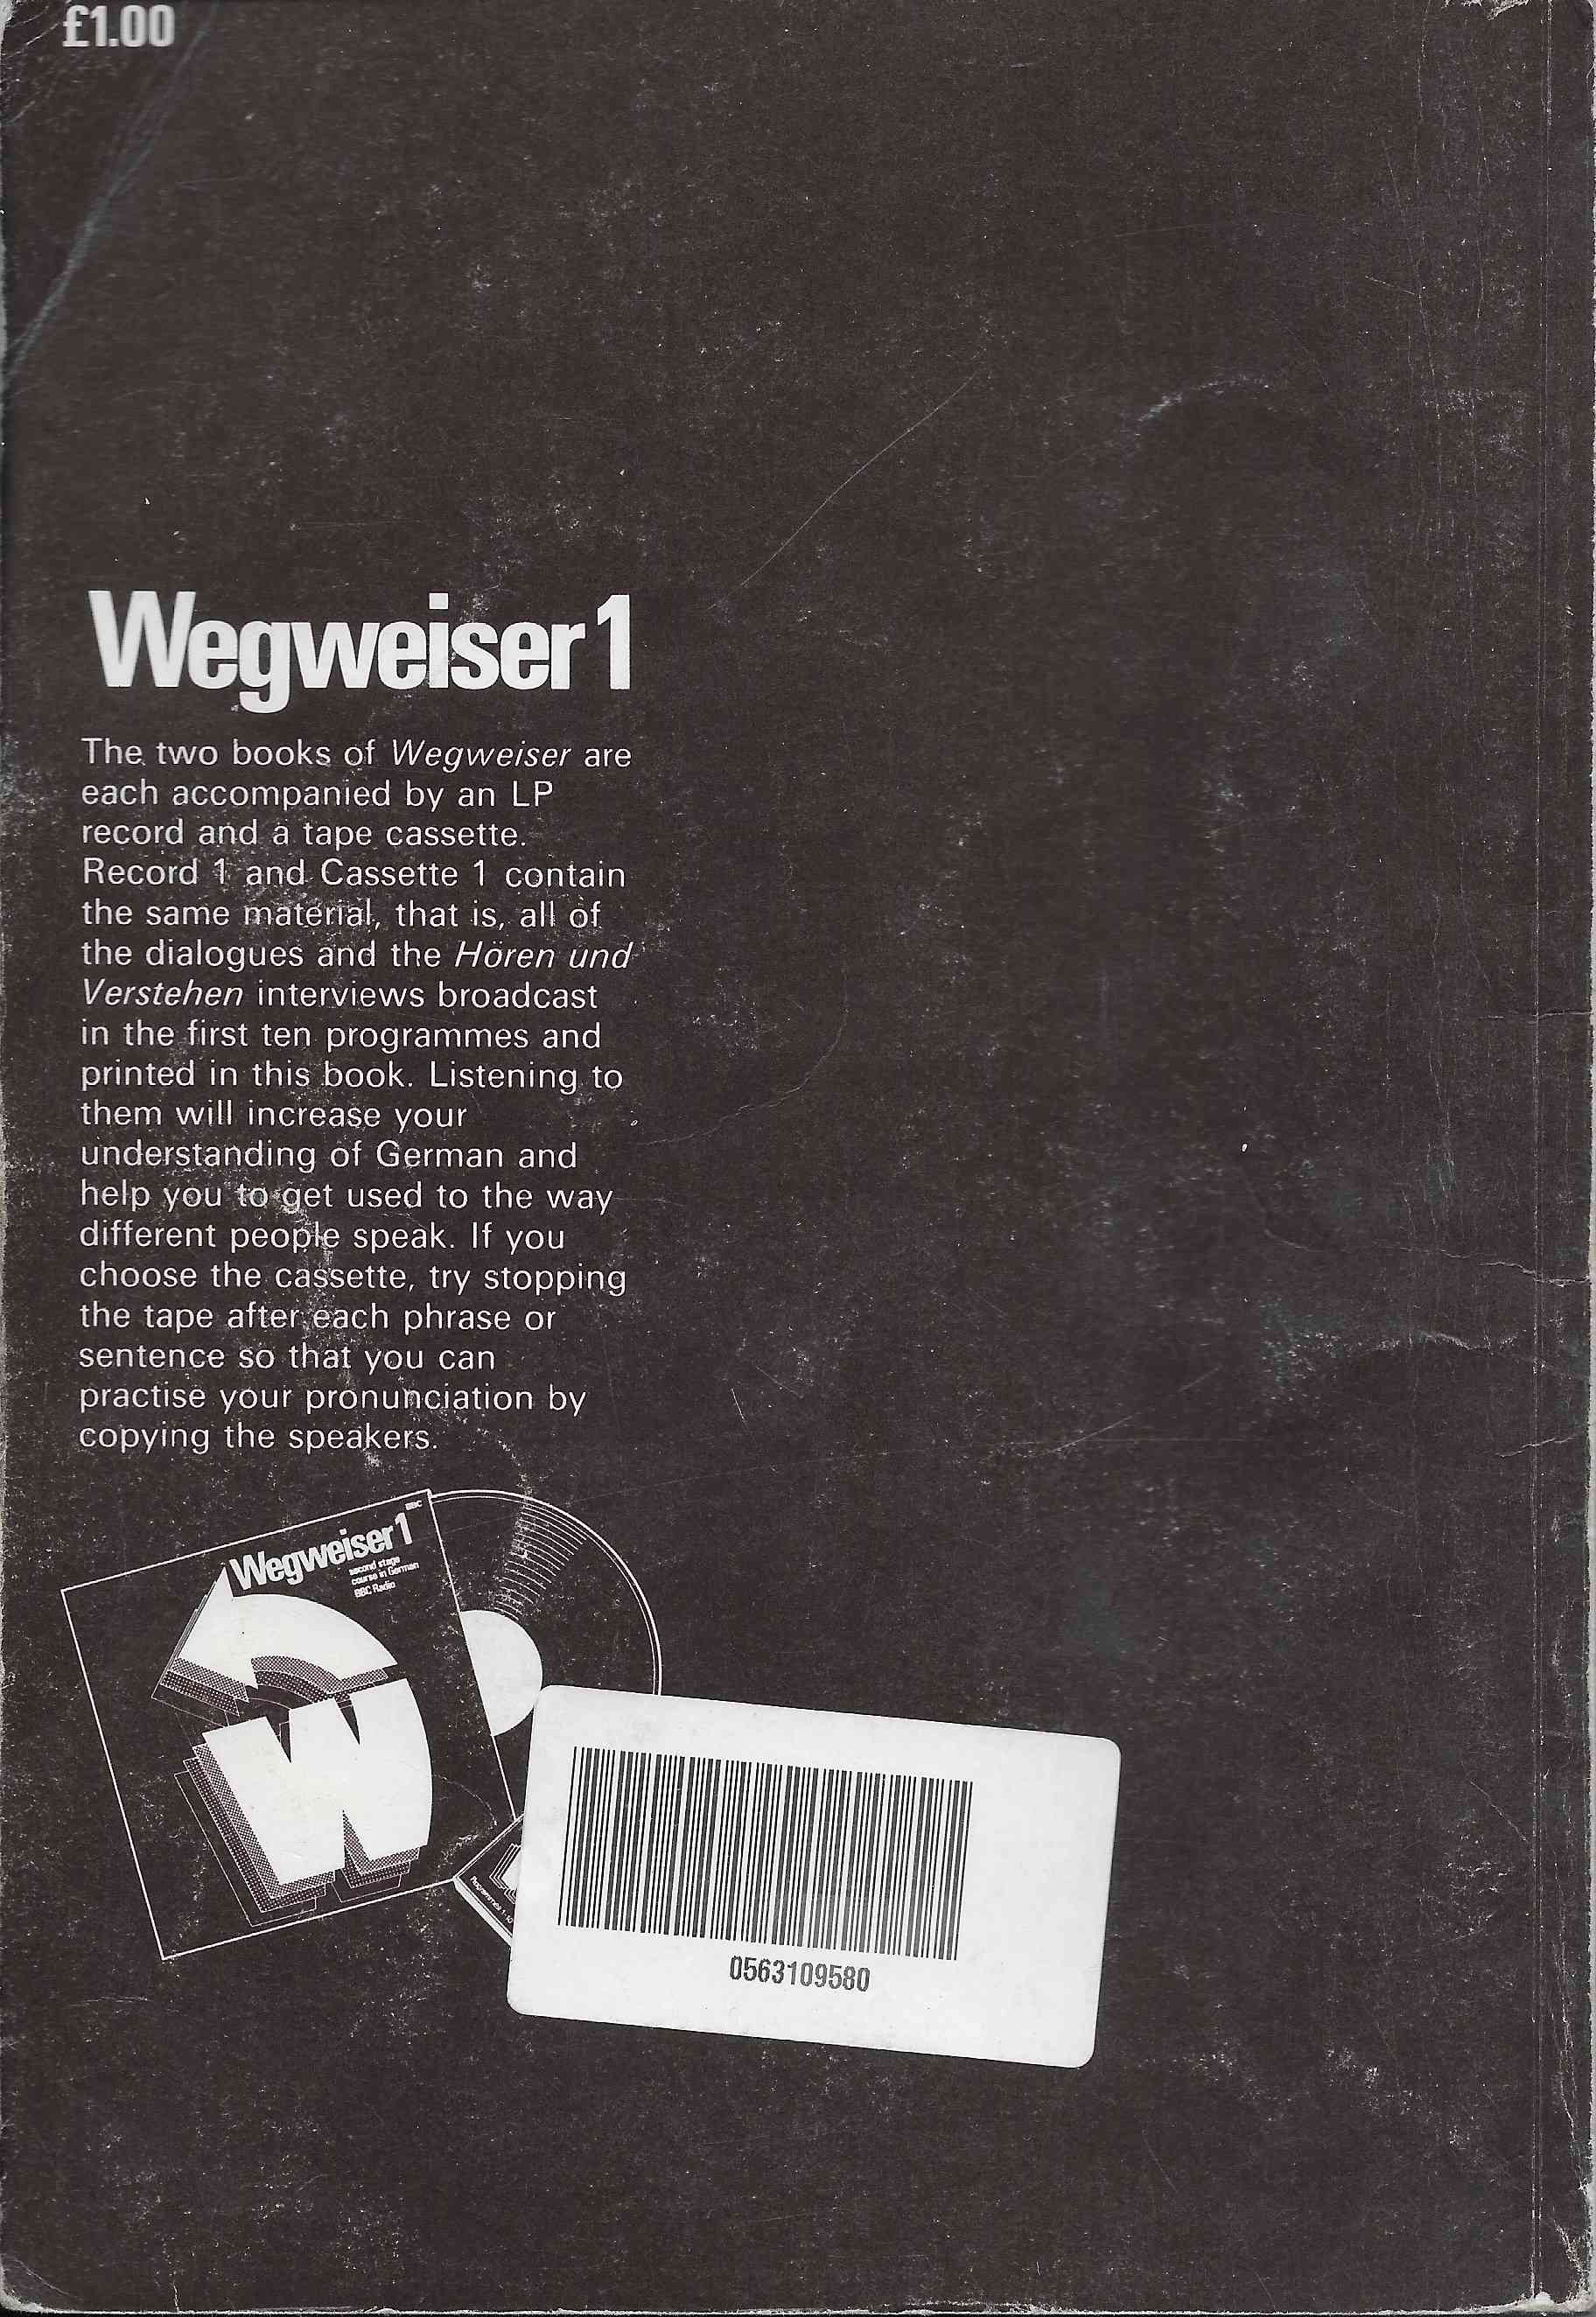 Picture of ISBN 0 563 10958 0 Wegweiser 1 by artist Antony Peck / Frank Kershaw / Helga Howard from the BBC records and Tapes library